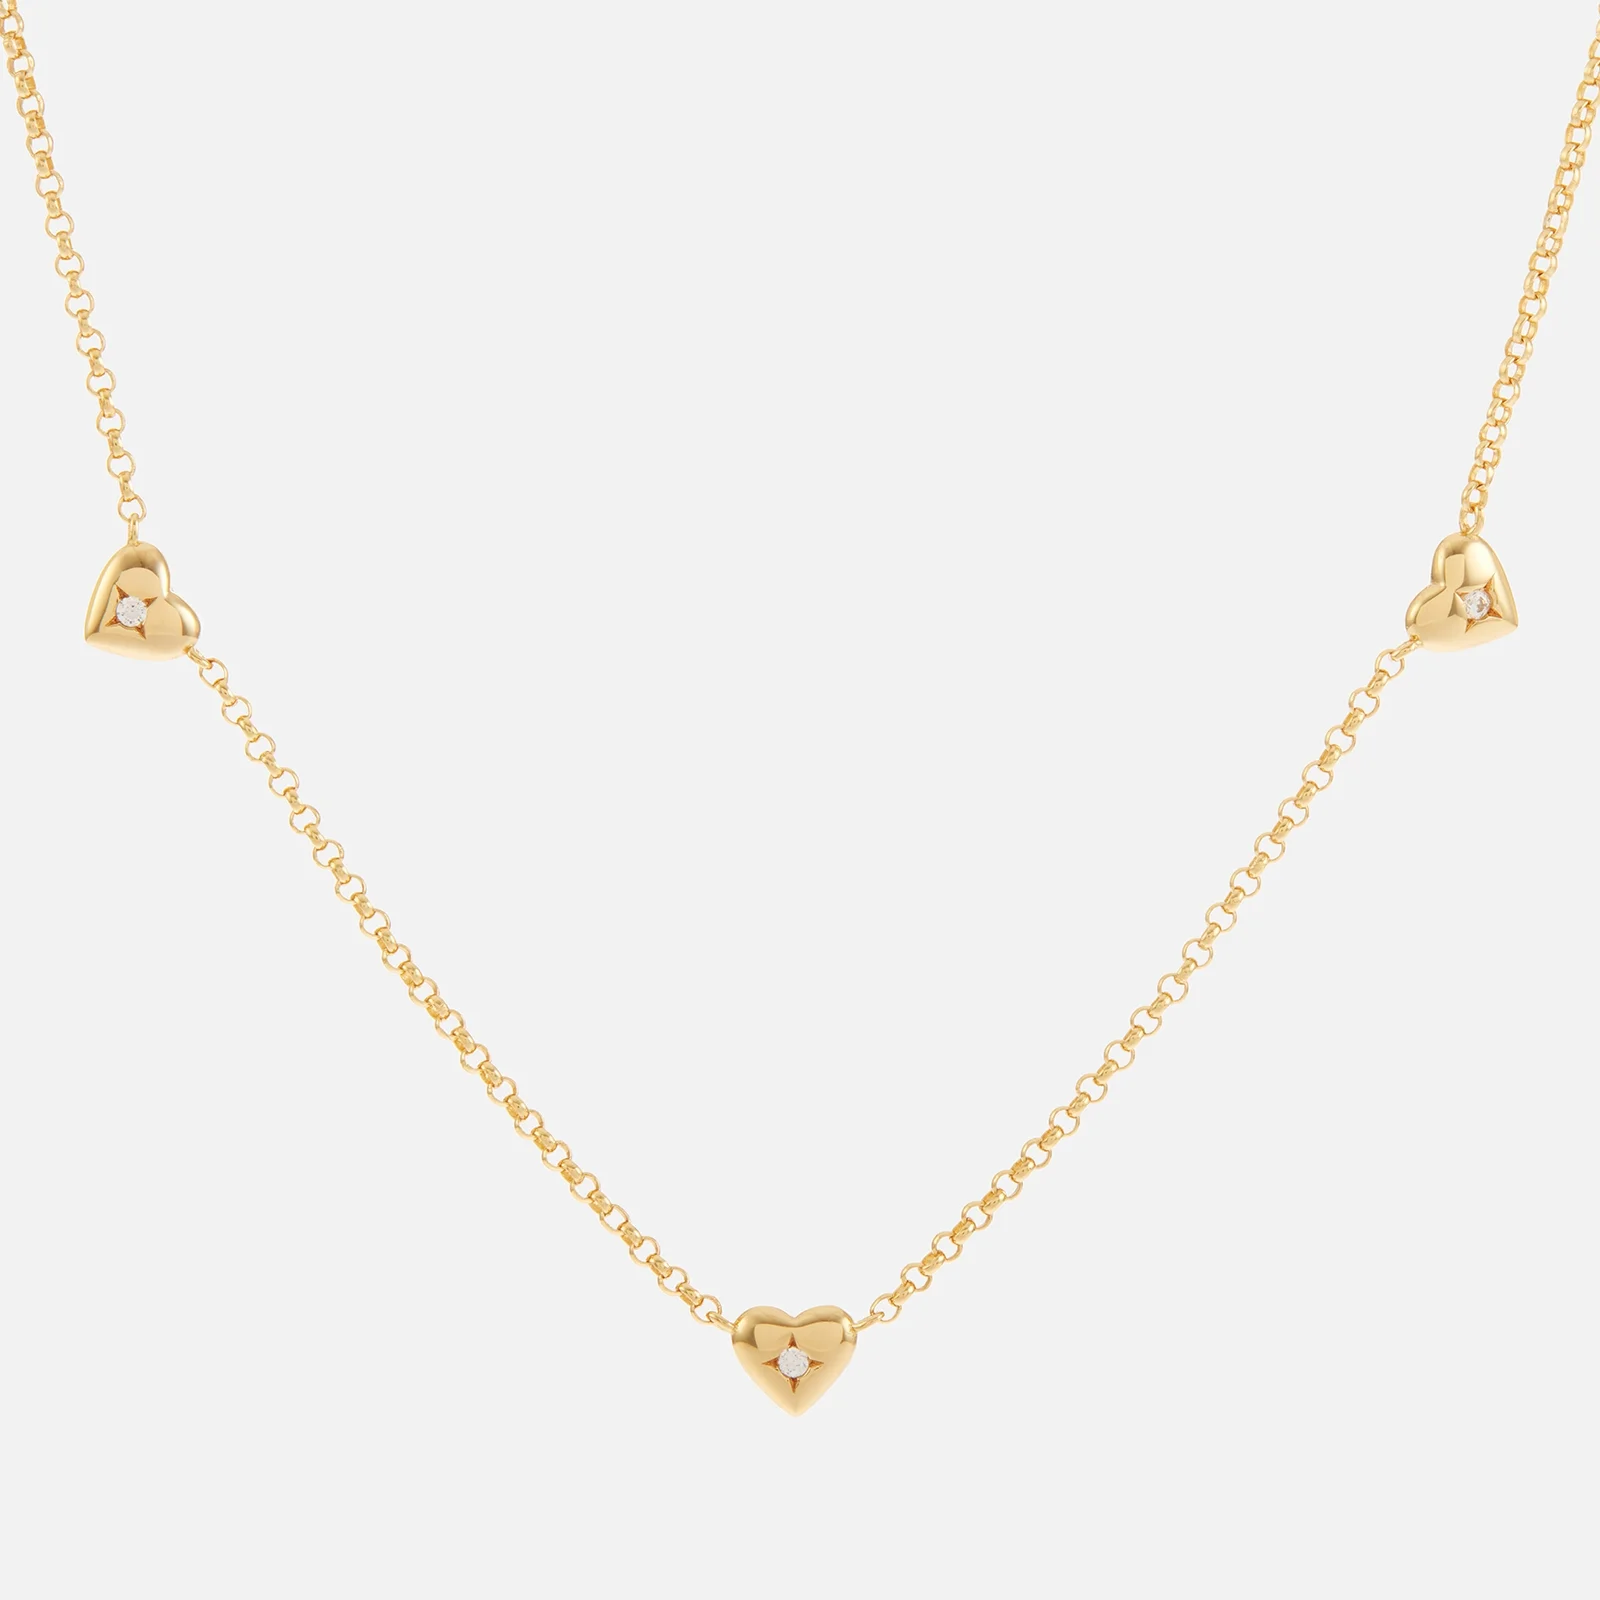 Astrid & Miyu Heart Charm 18K Gold-Plated Sterling Silver Necklace Image 1